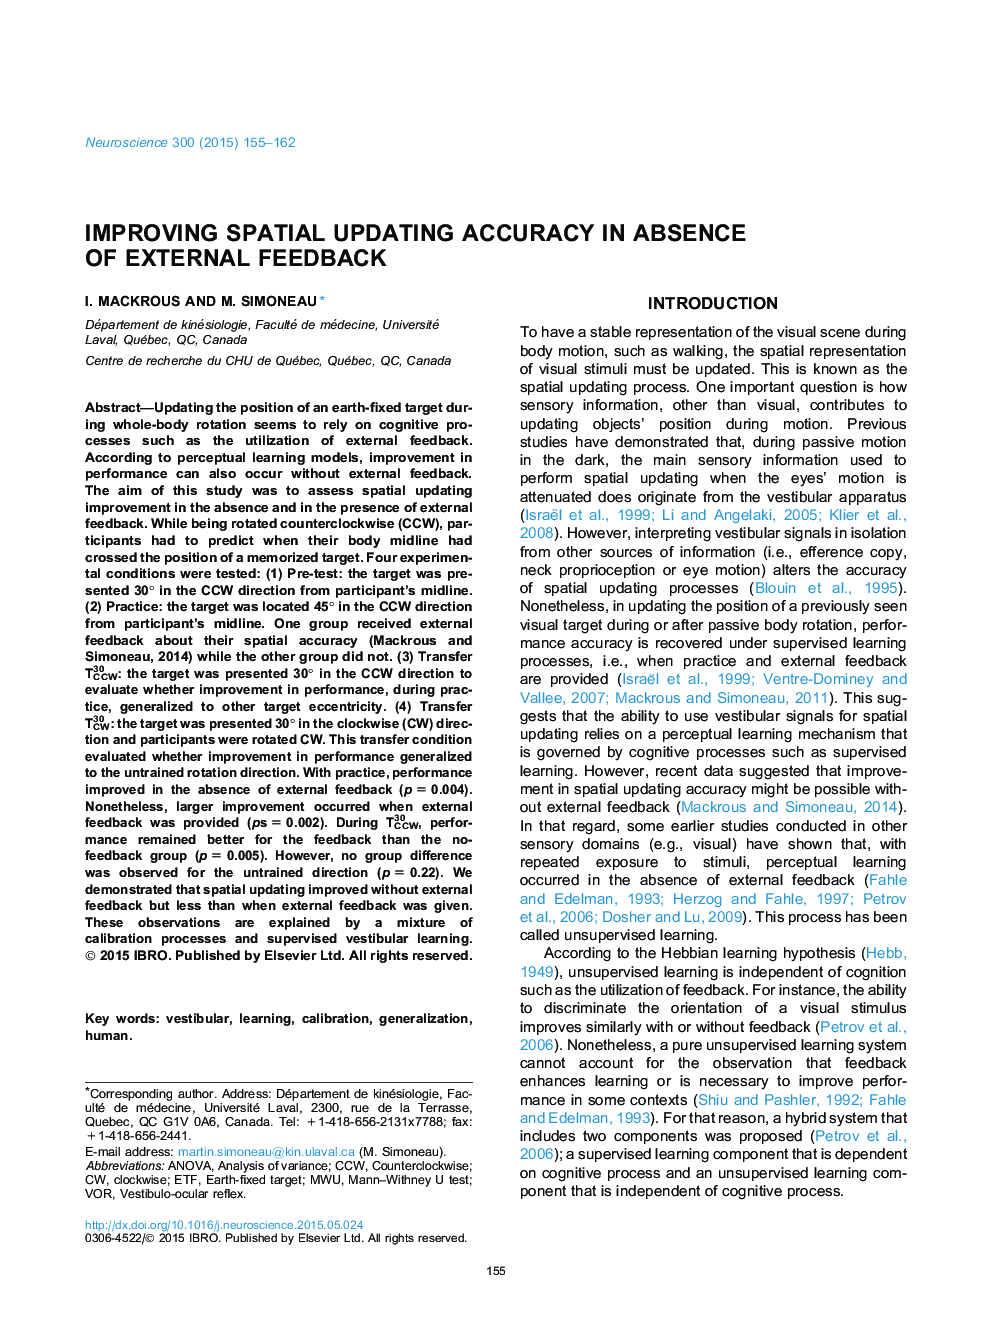 Improving spatial updating accuracy in absence of external feedback